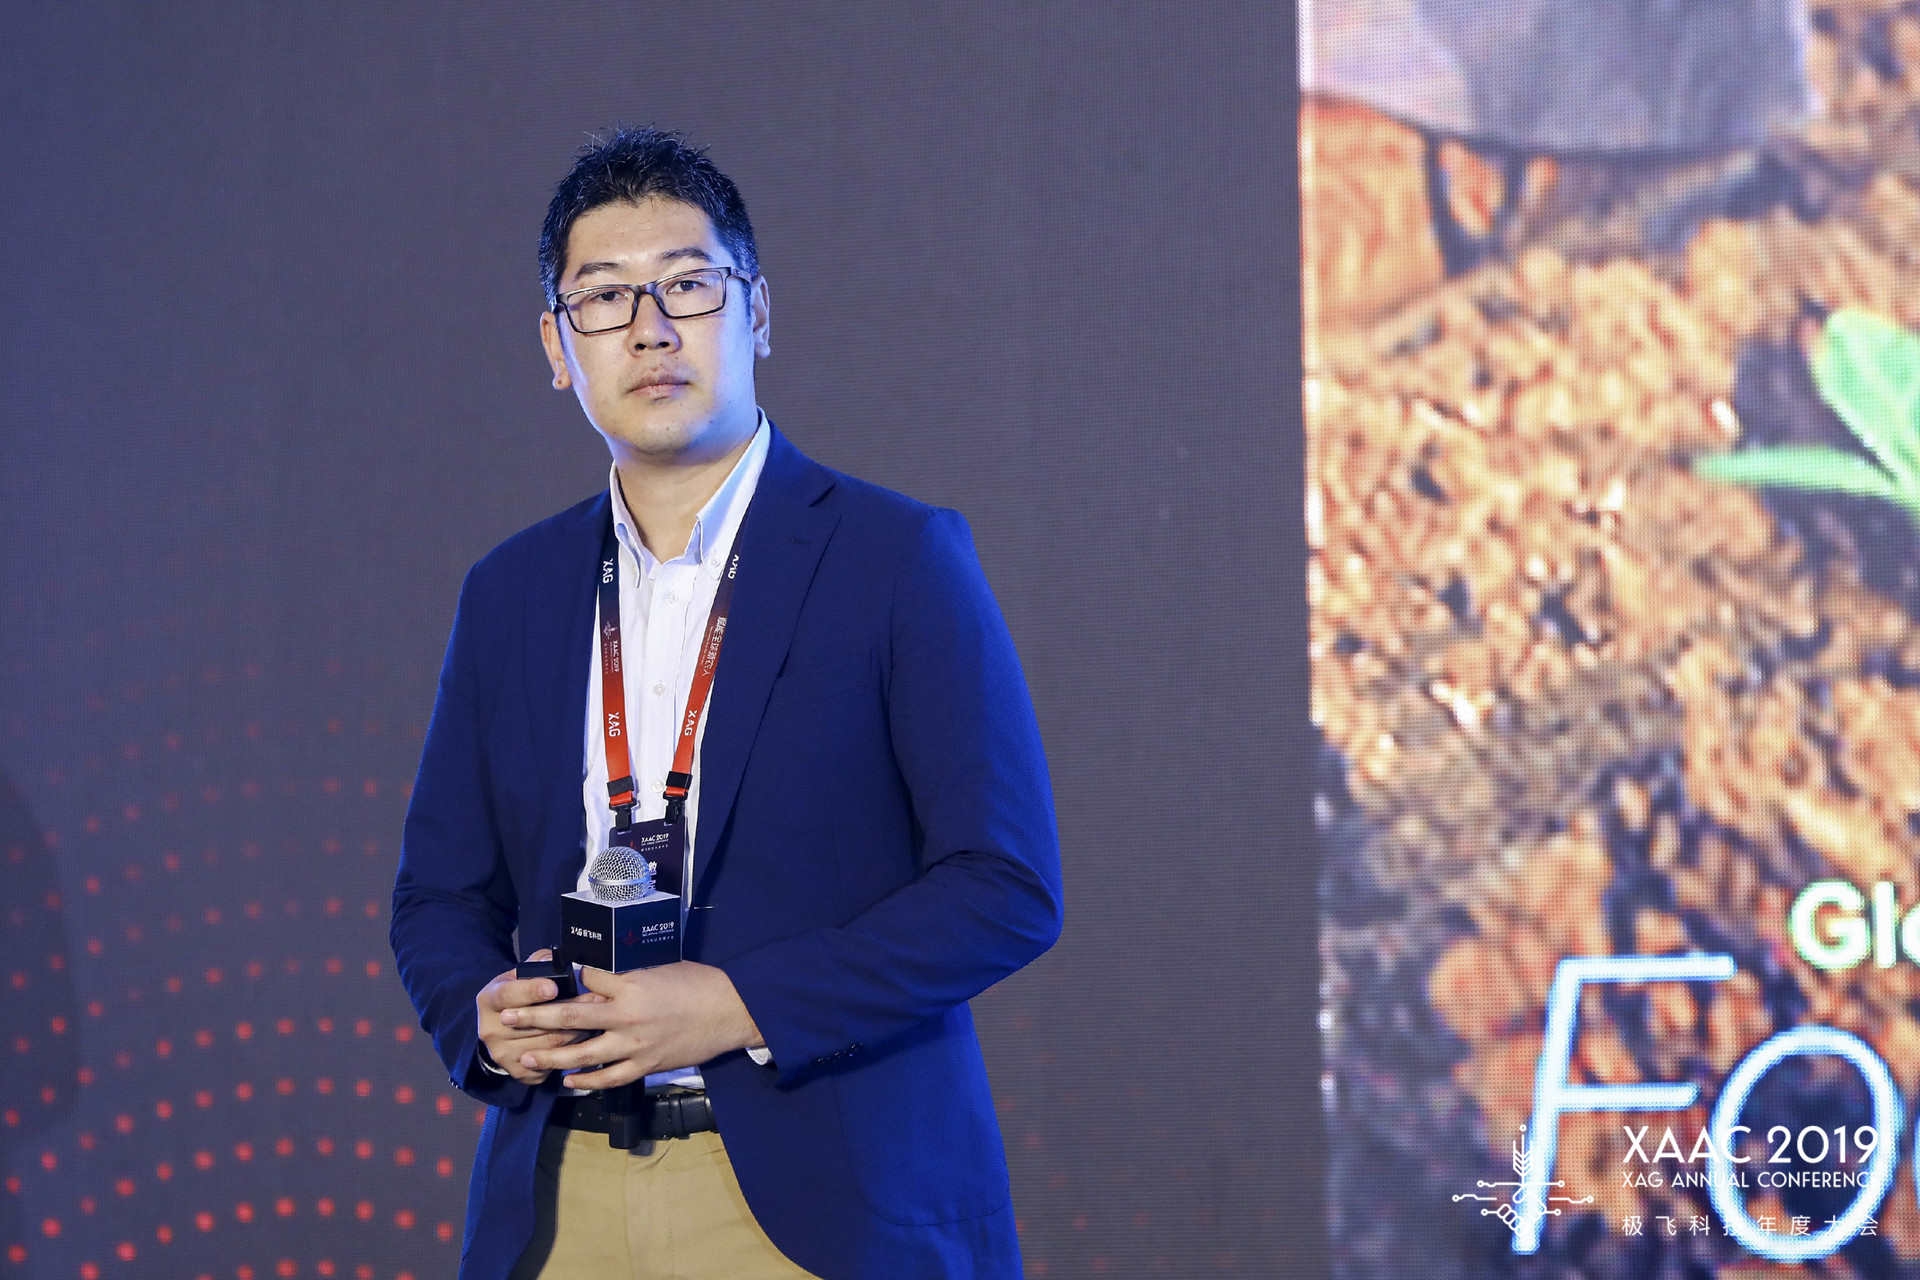 Kohei Sakata, Head of Digital Strategy and Solution for Asia Pacific, Crop Science Division, Bayer